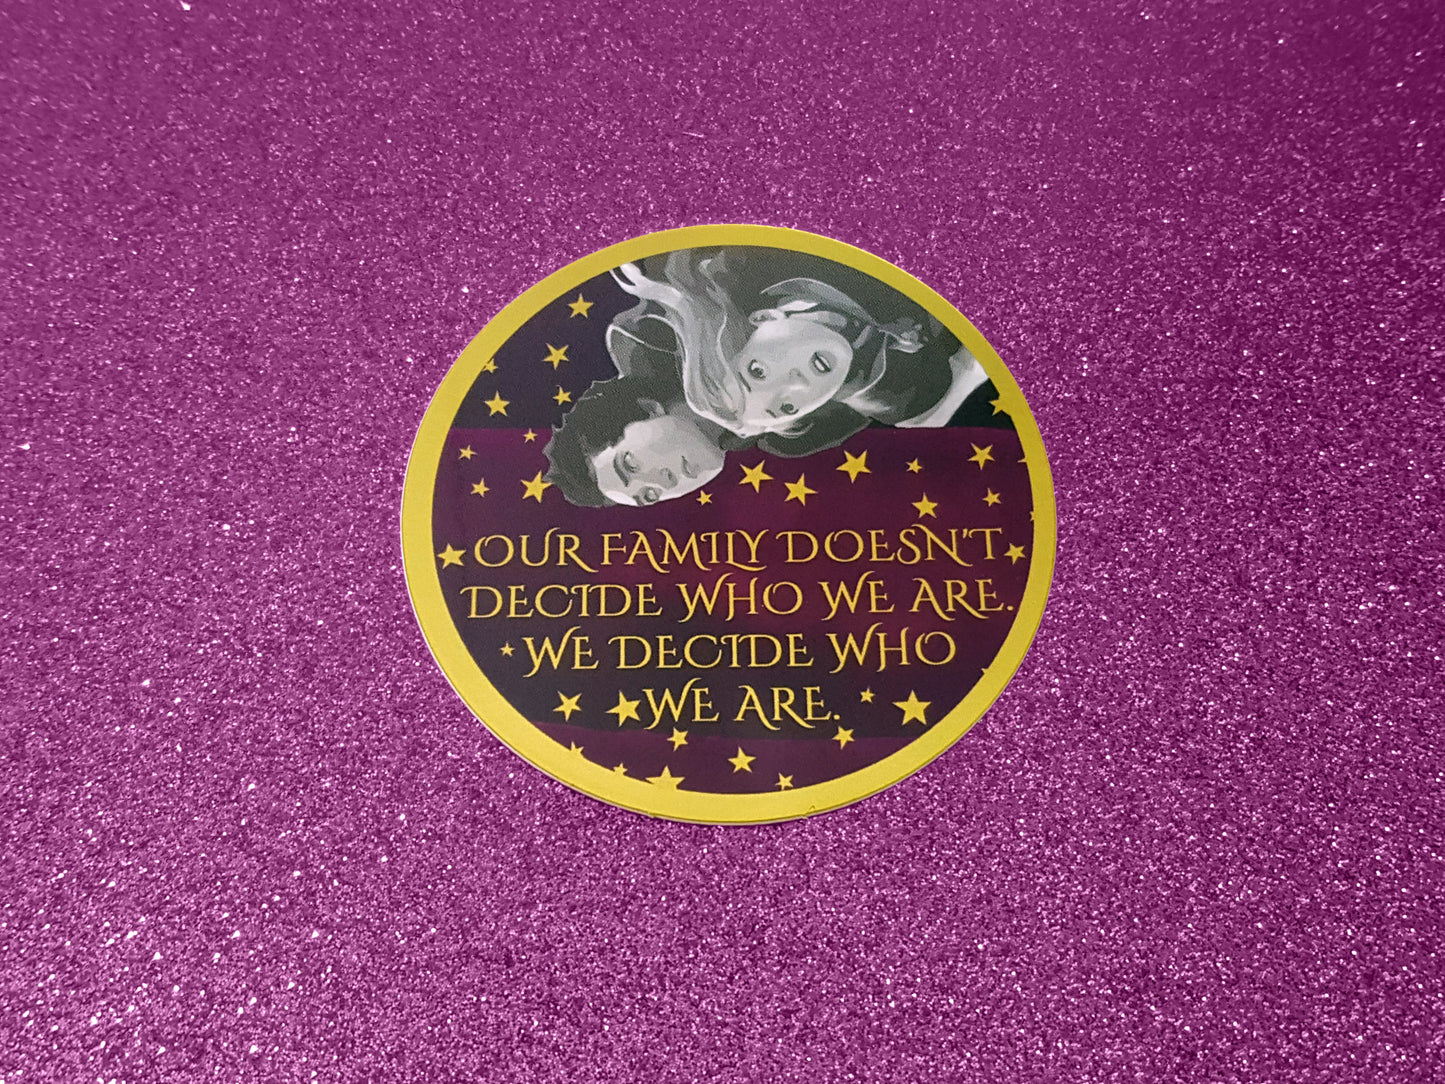 Keeper of the Lost Cities bookish quote waterproof vinyl mirror sticker